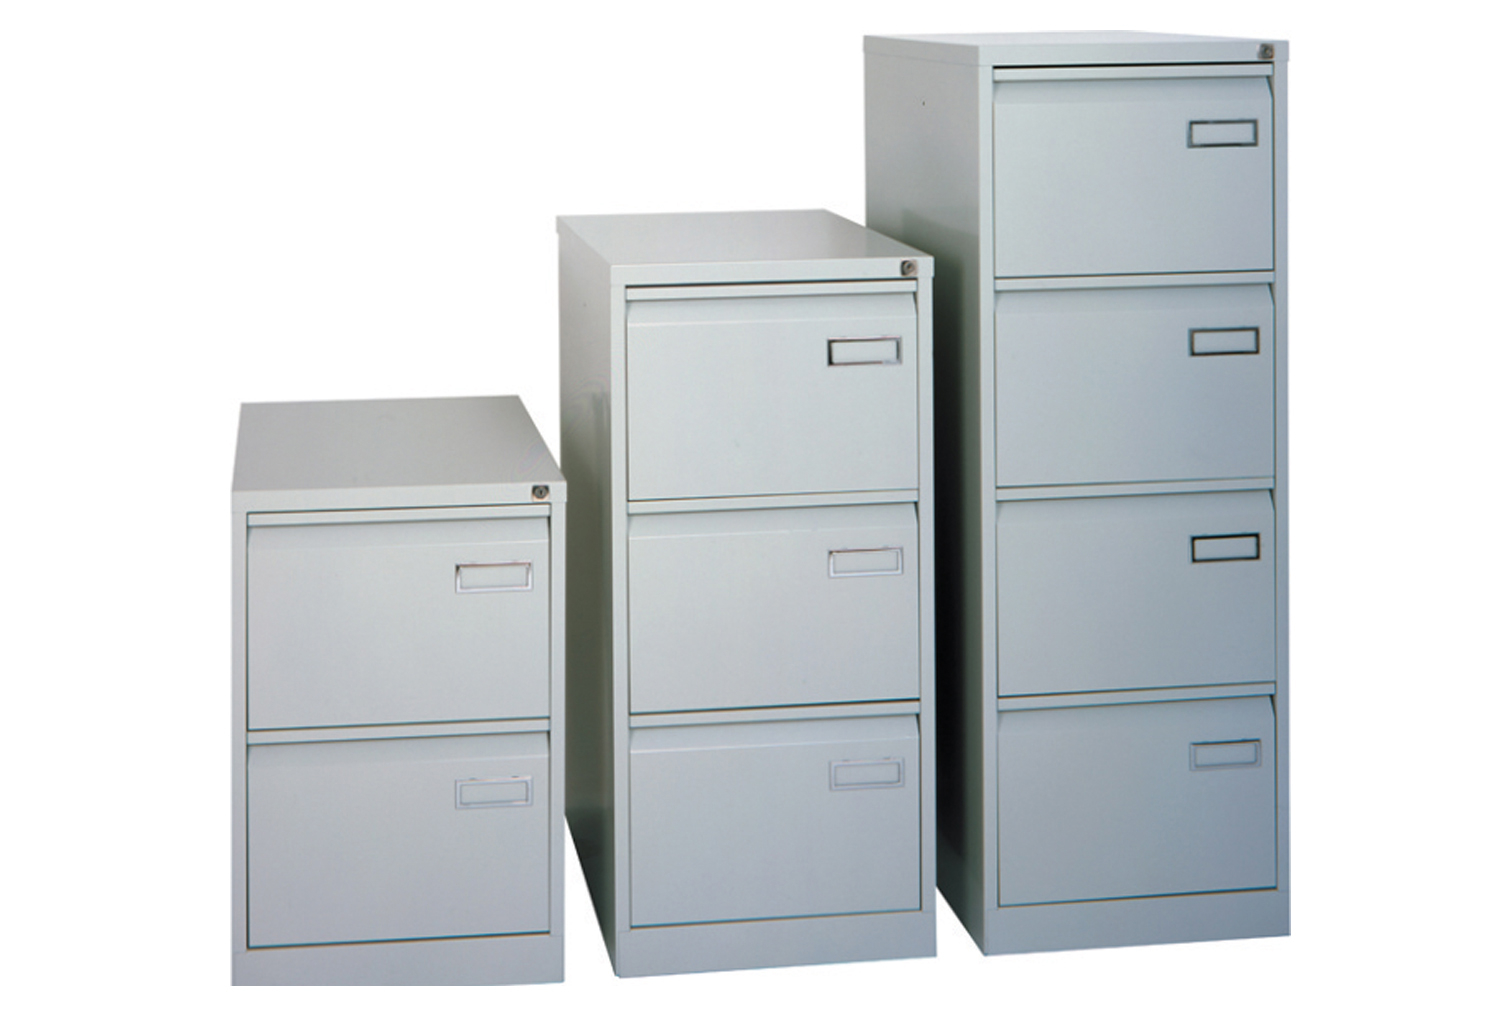 Bisley Executive PSF Filing Cabinet, 3 Drawer - 47wx62dx102h (cm), White